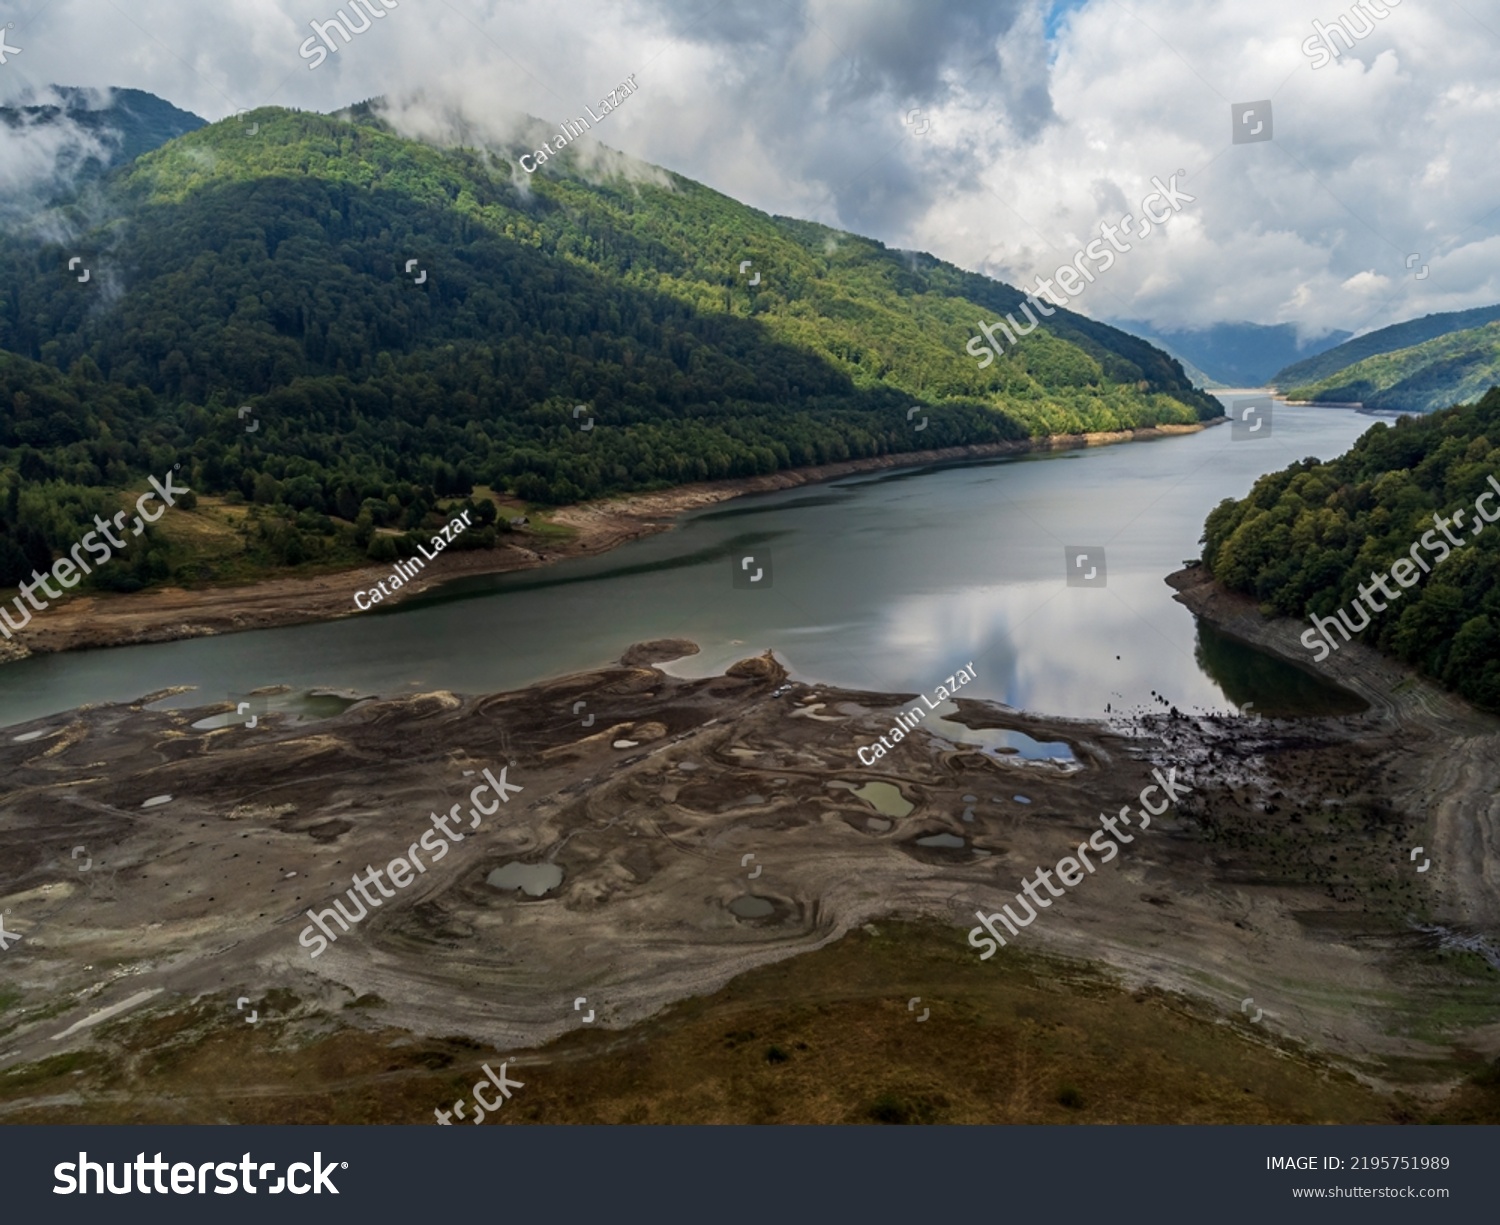 Aerial view of the Poiana Marului Lake shore during the summer drought who has hit Europe. Photo taken on 31st of July 2022 in Poiana Marului reservation, Caras-Severin County, Romania. #2195751989